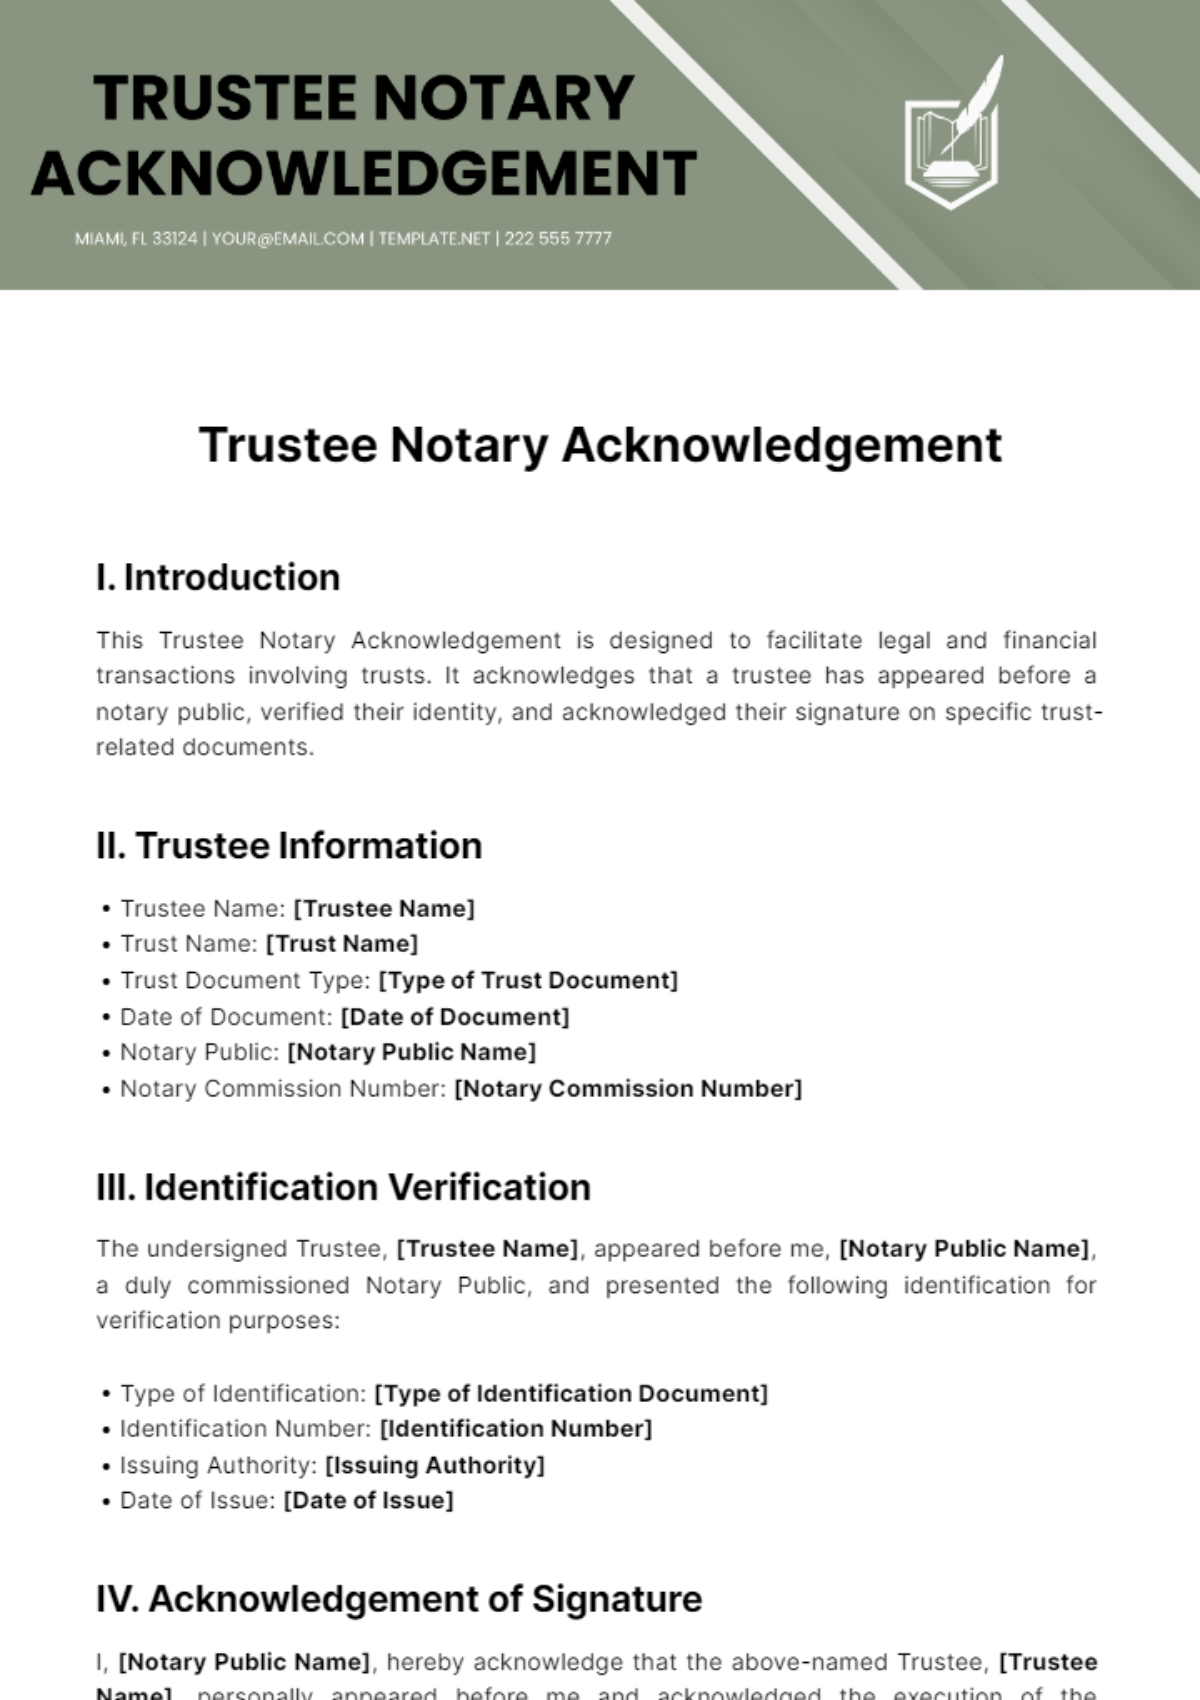 Free Trustee Notary Acknowledgement Template